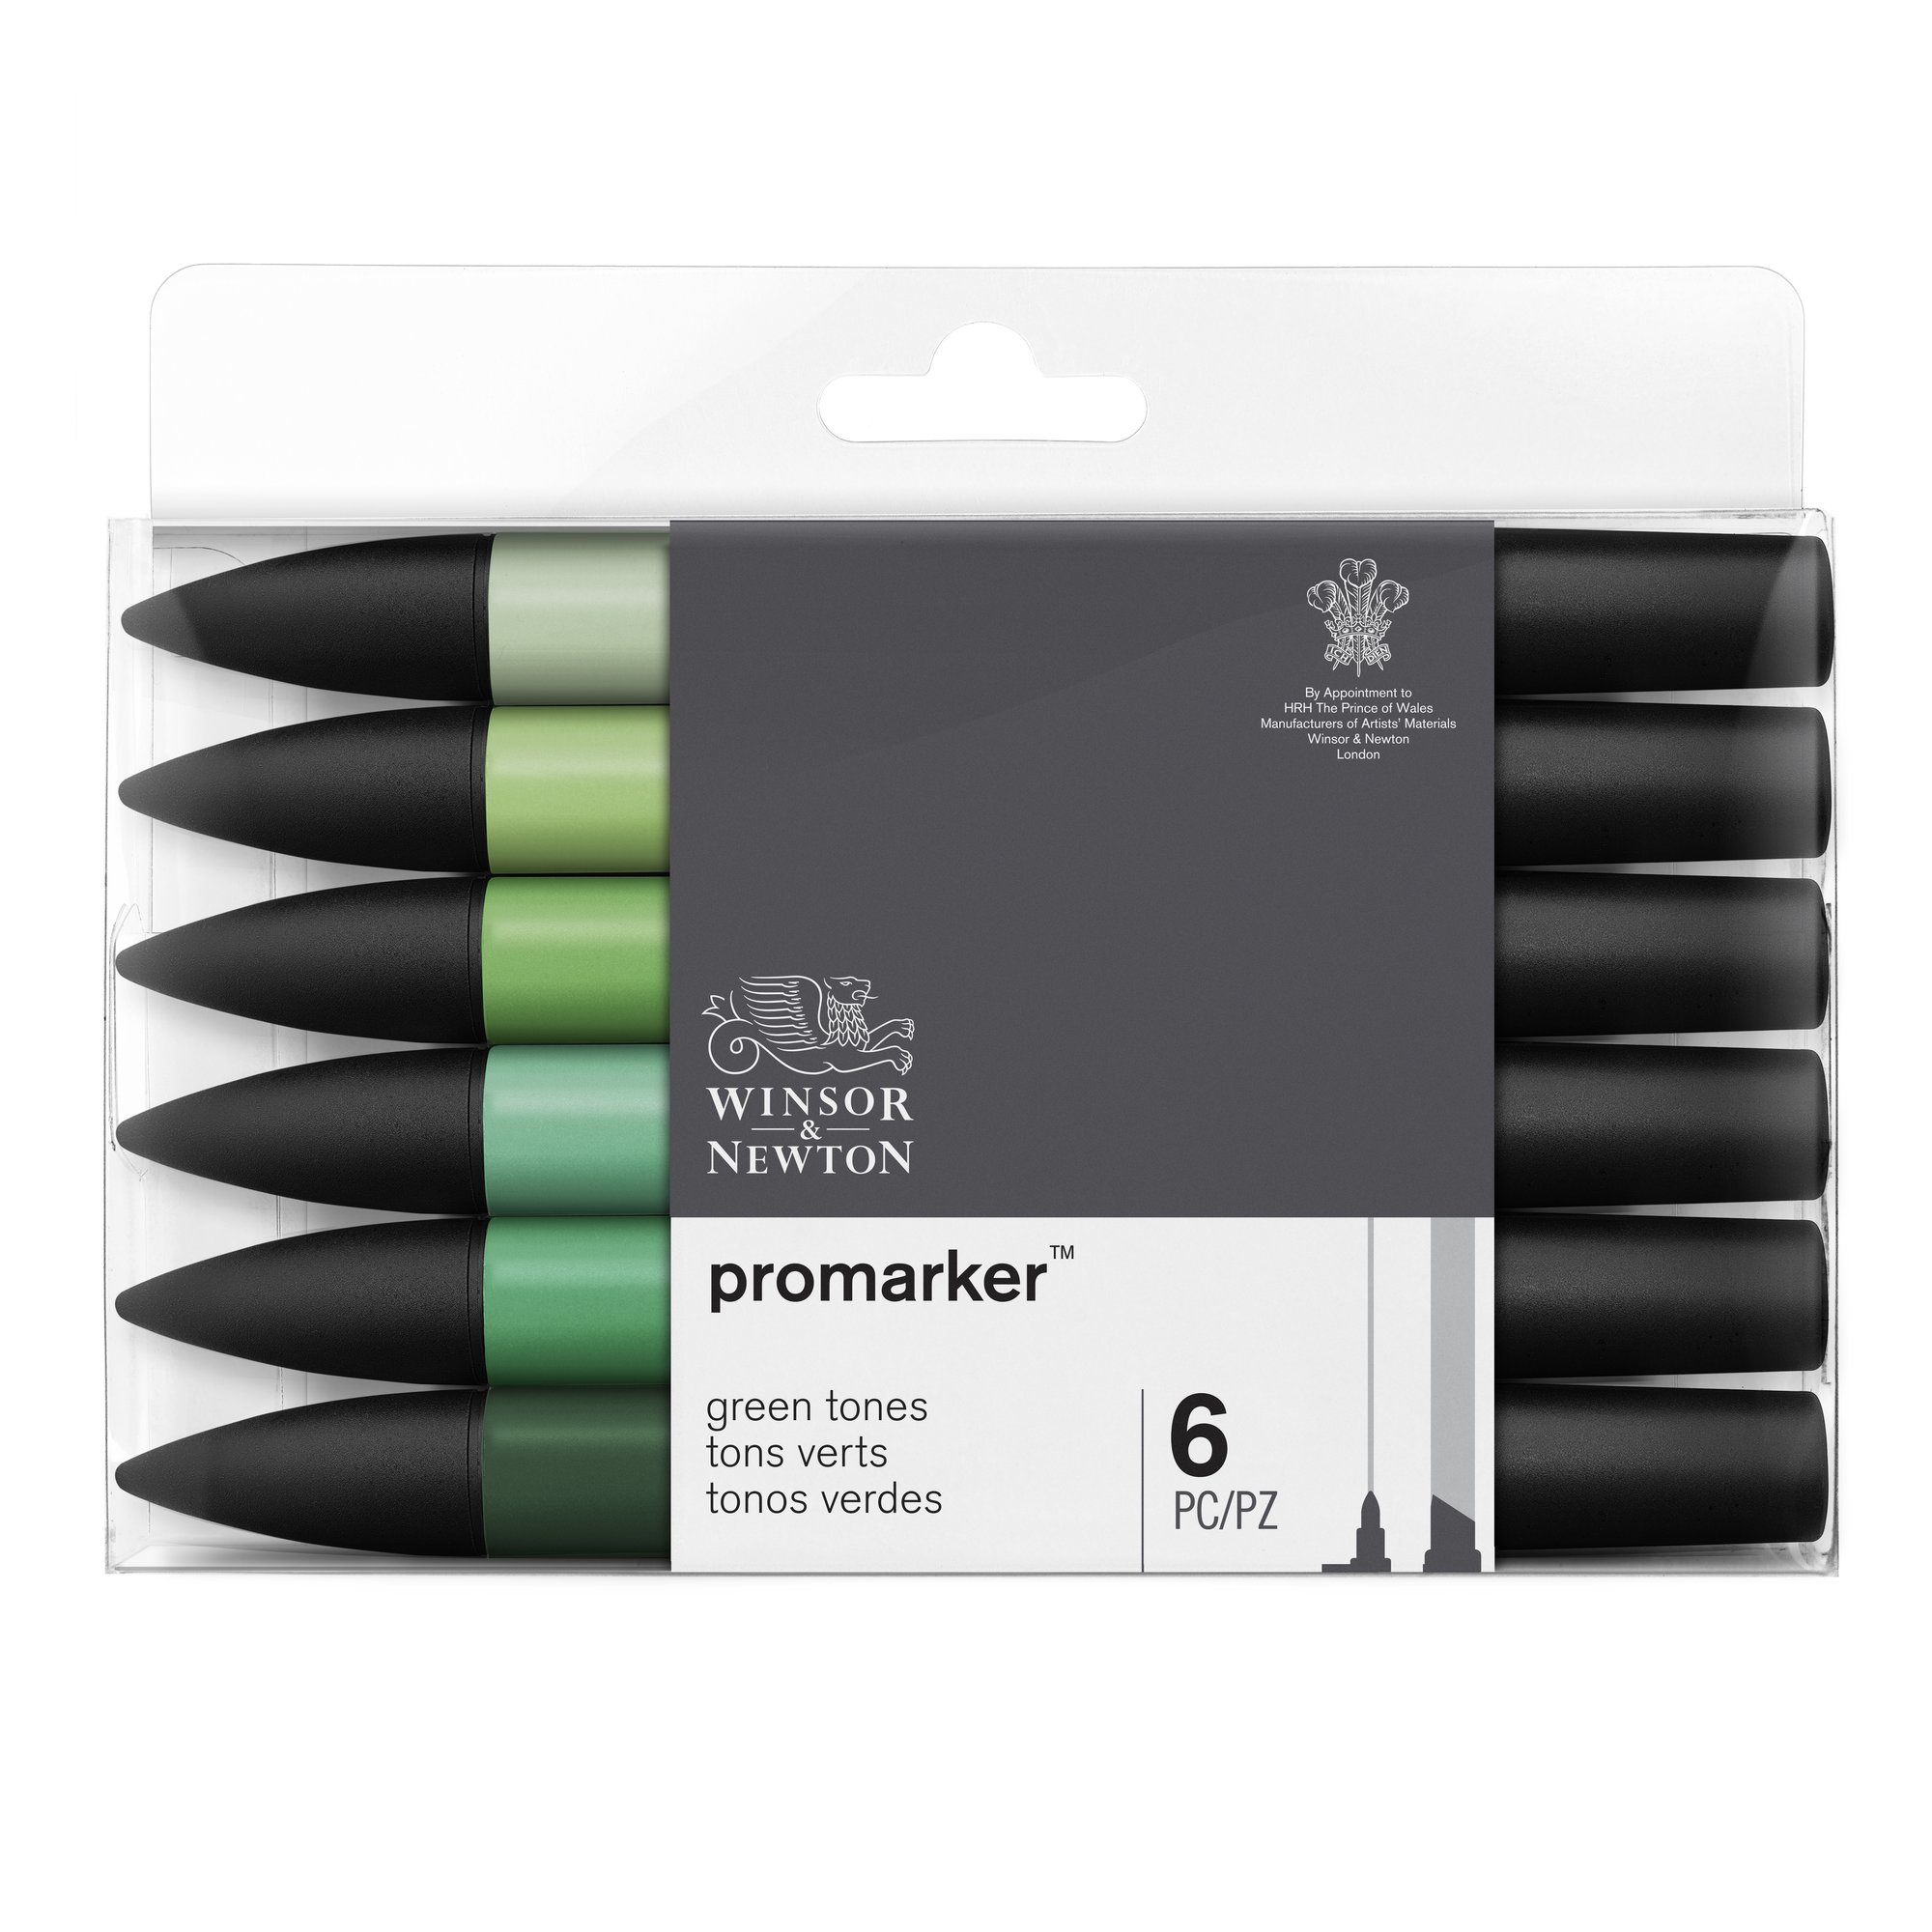 Winsor & Newton Promarker Graphic Drawing Pens Green Tones Set of 6 Markers